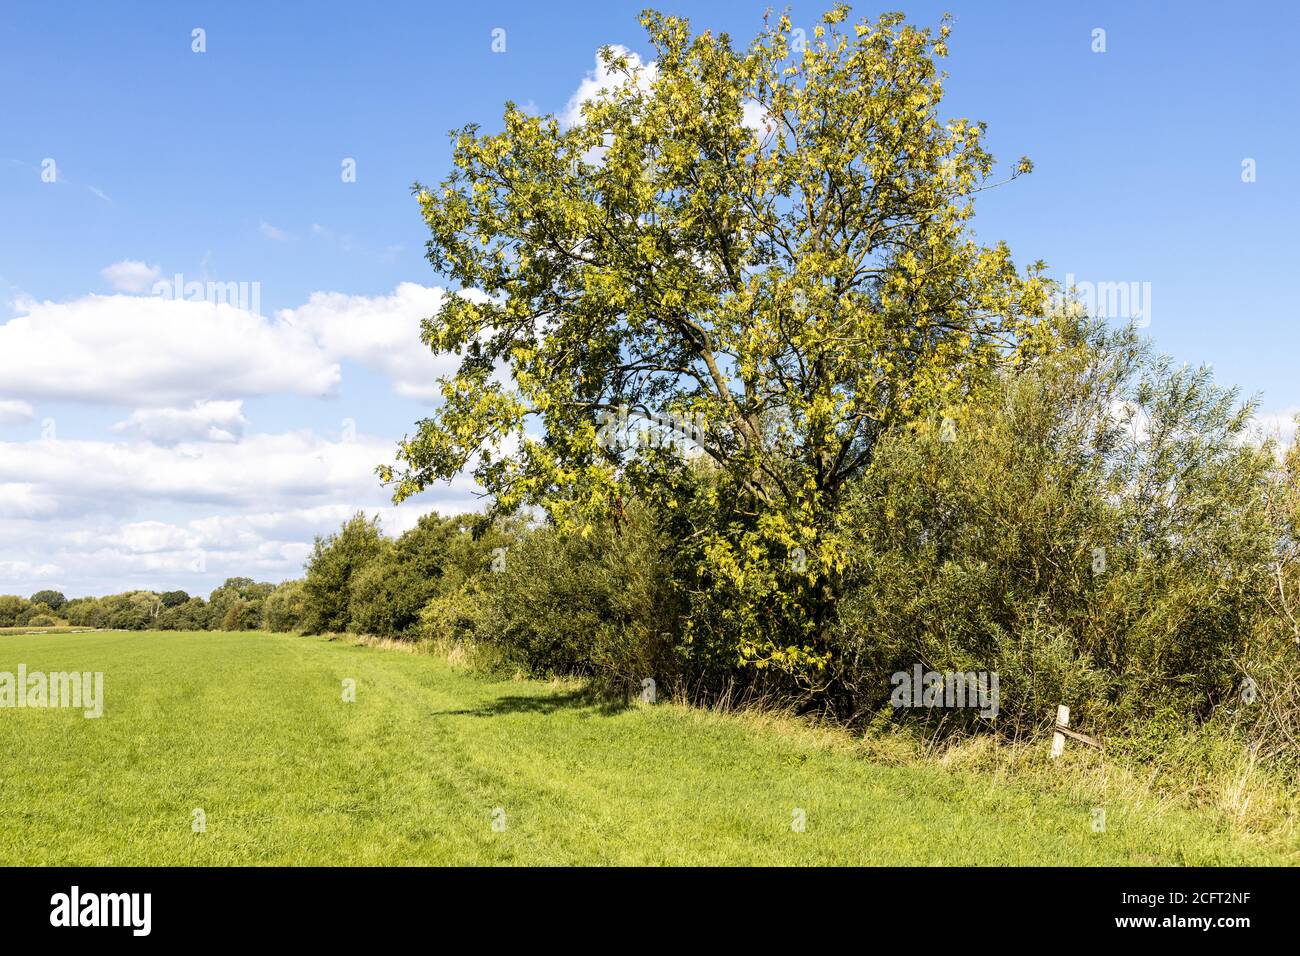 A healthy ash tree in early autumn on the banks of the River Severn near the Severn Vale village of Maisemore, Gloucestershire UK Stock Photo